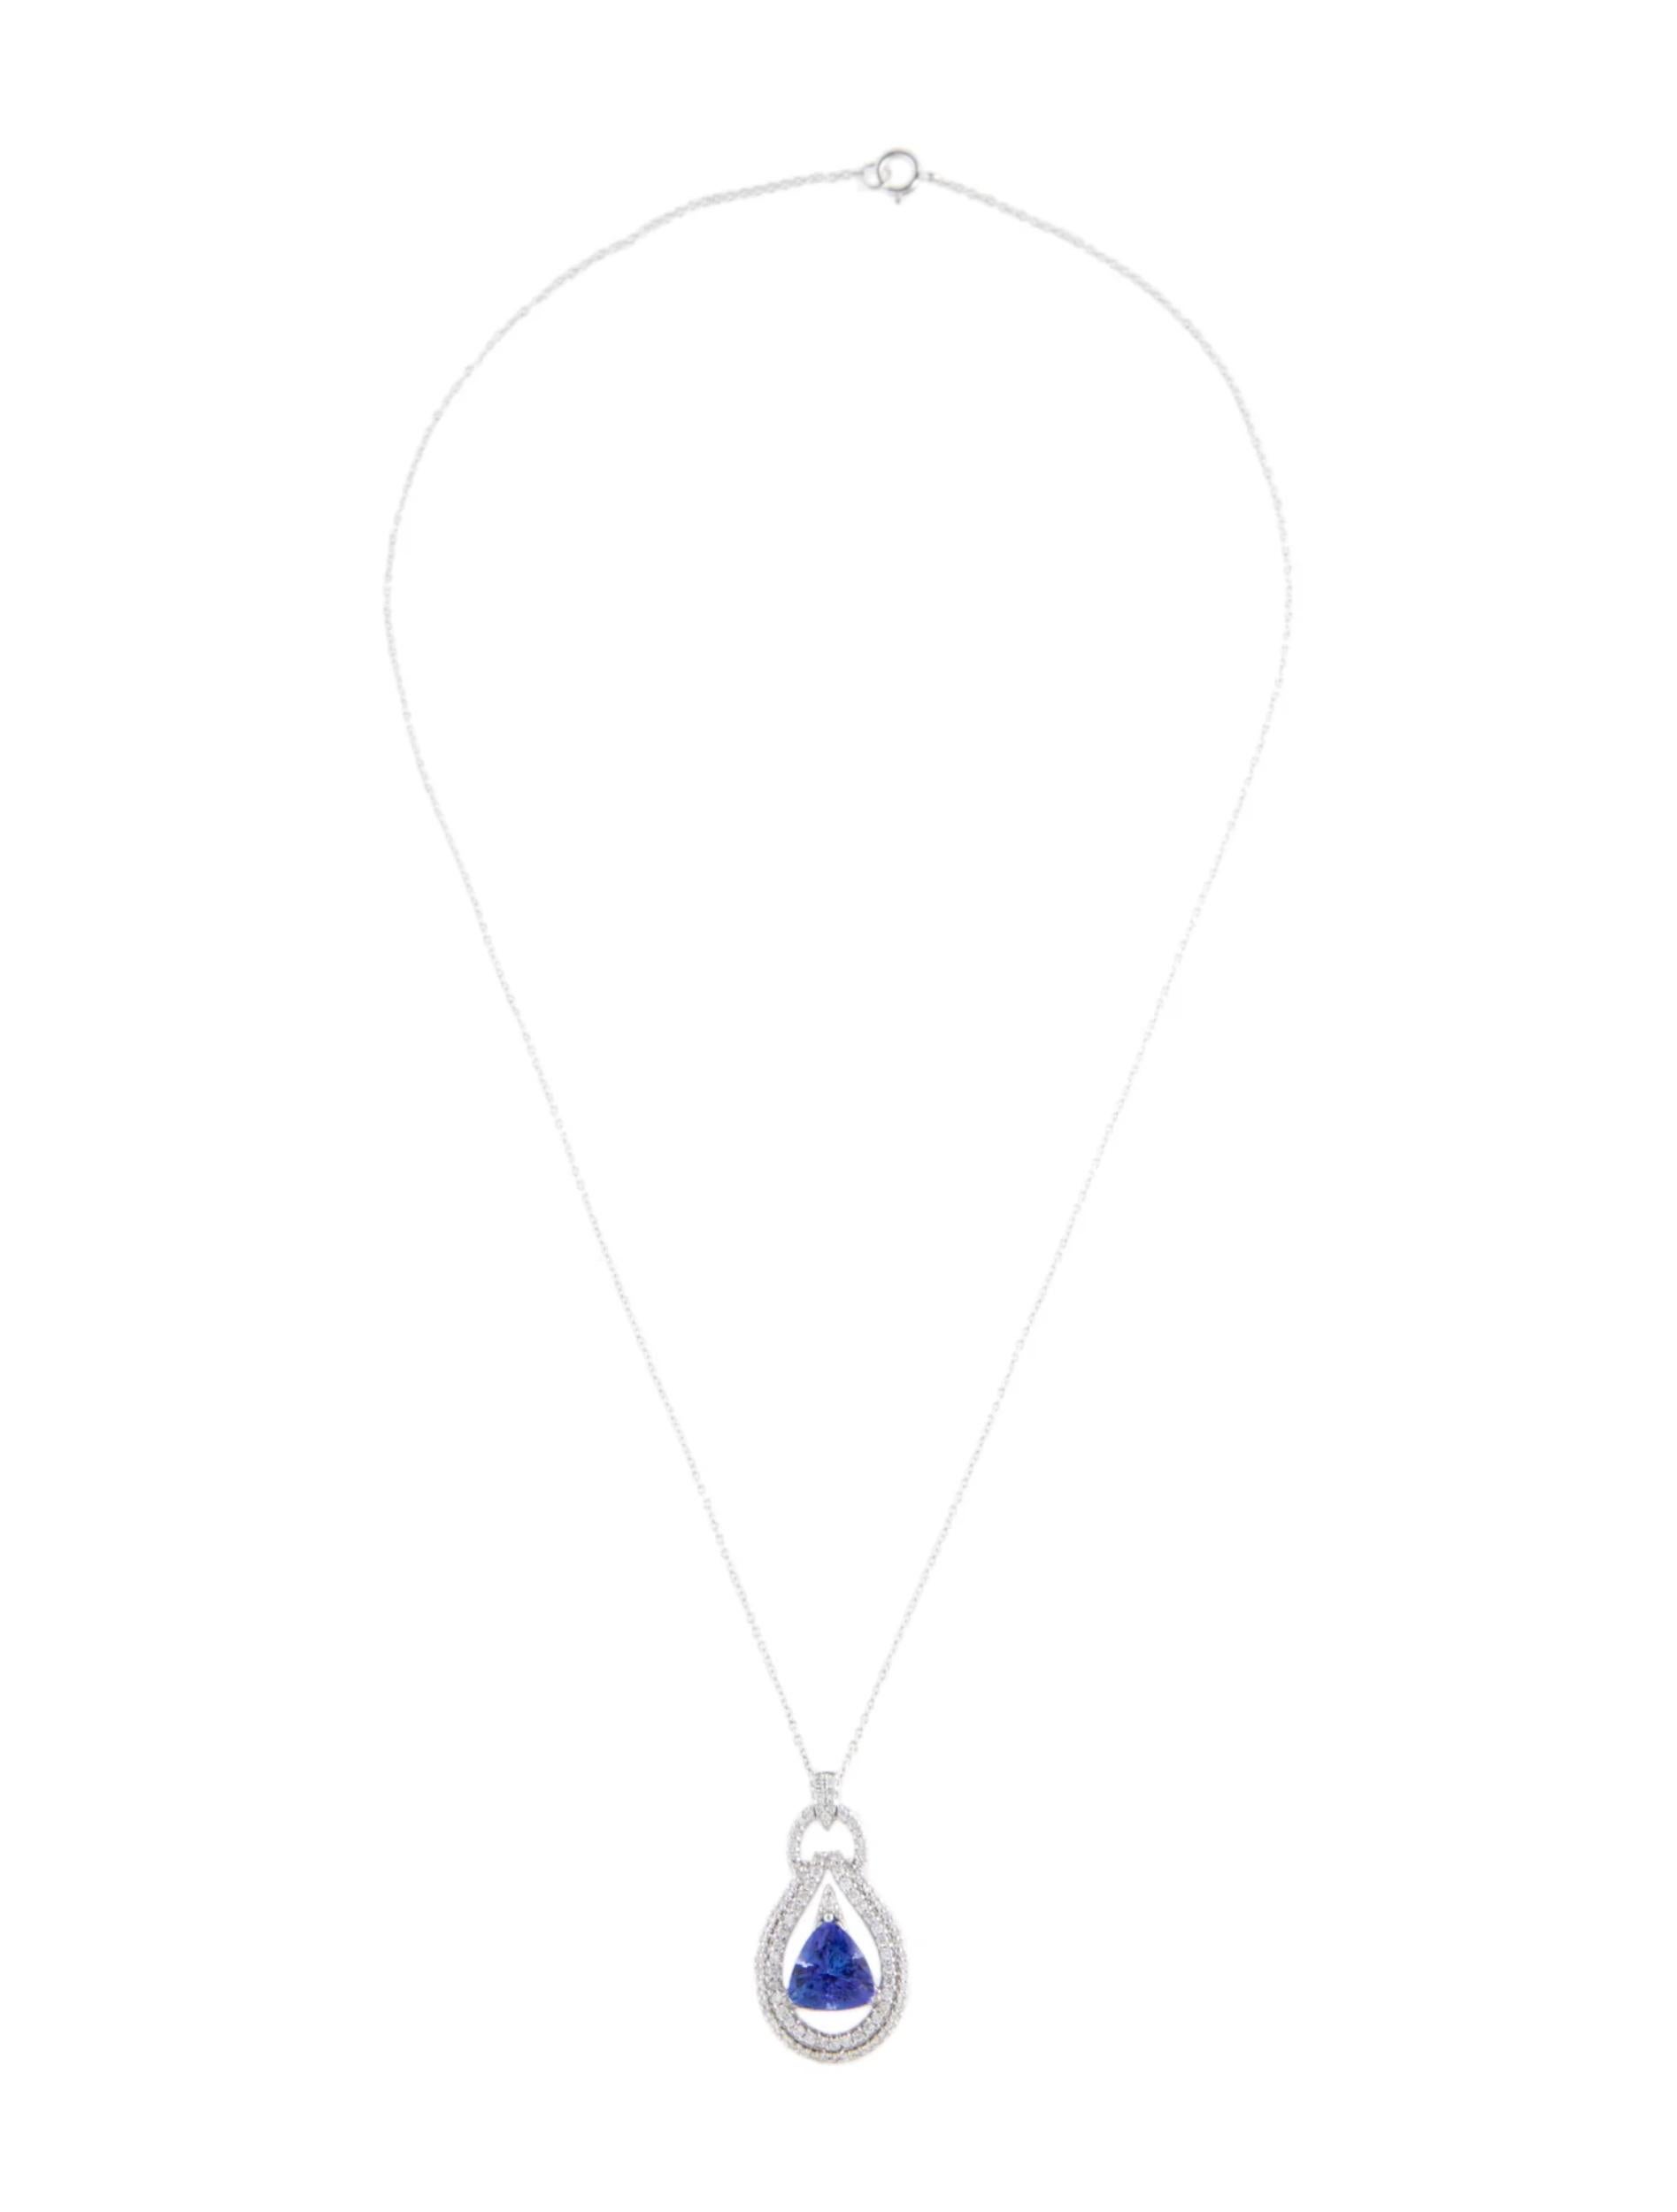 Elevate your style with this exquisite 14K white gold pendant necklace. The centerpiece features a captivating tanzanite gemstone, weighing 2.75 carats, in a modified triangular brilliant cut. Its enchanting violet hue adds a touch of elegance to